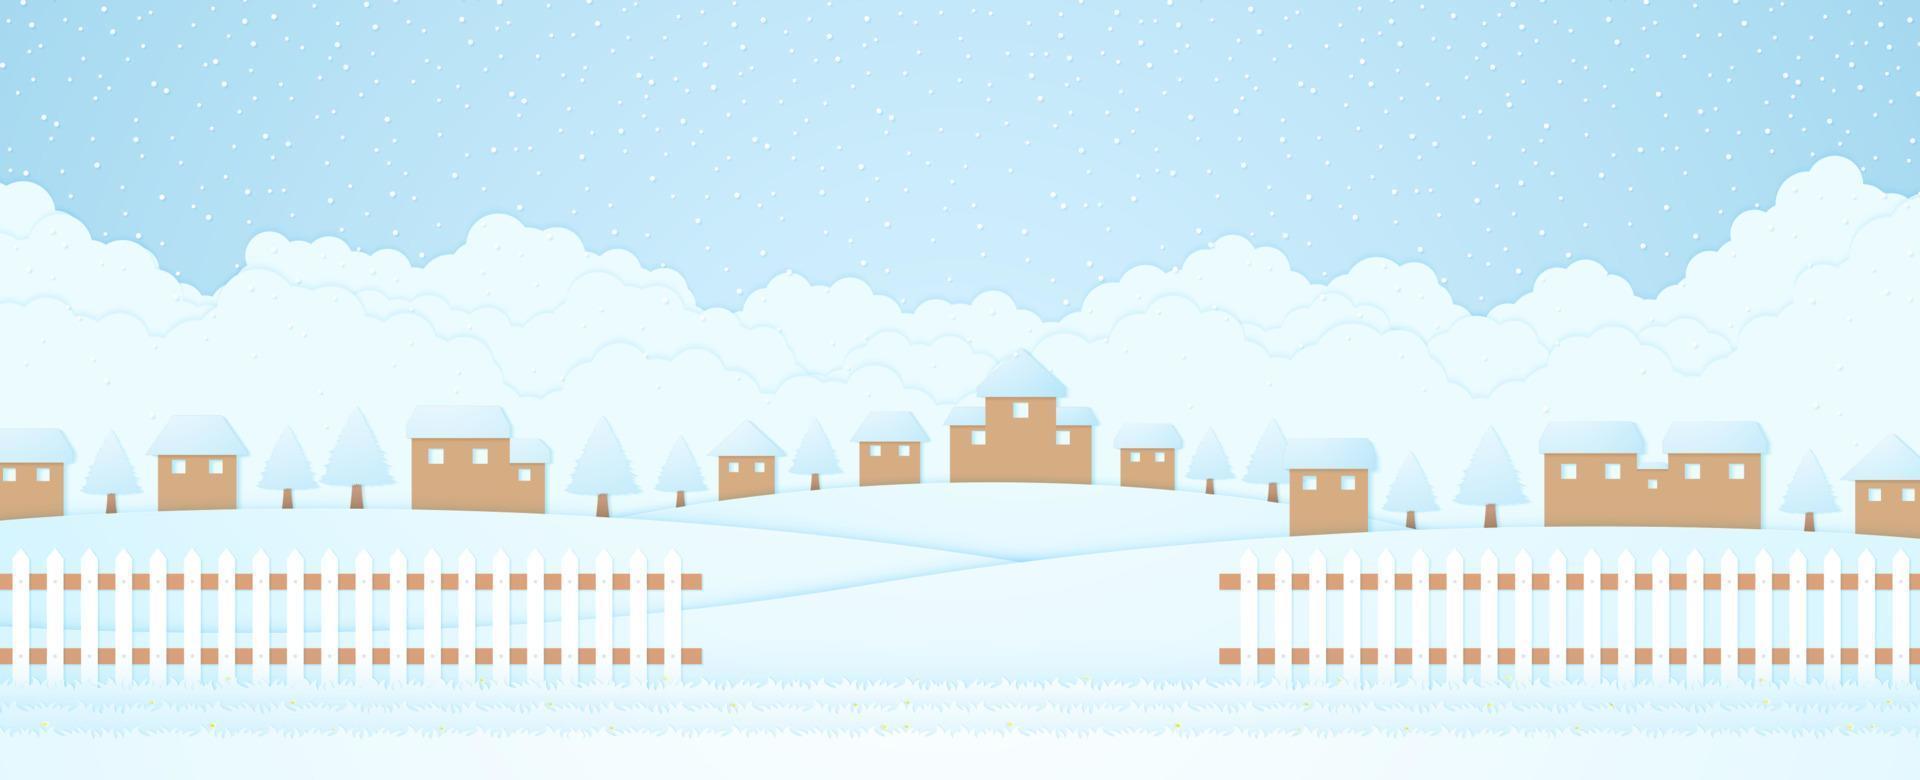 winter landscape, village or house and trees on hill with snow falling, grass and fence, cloud background, paper art style vector